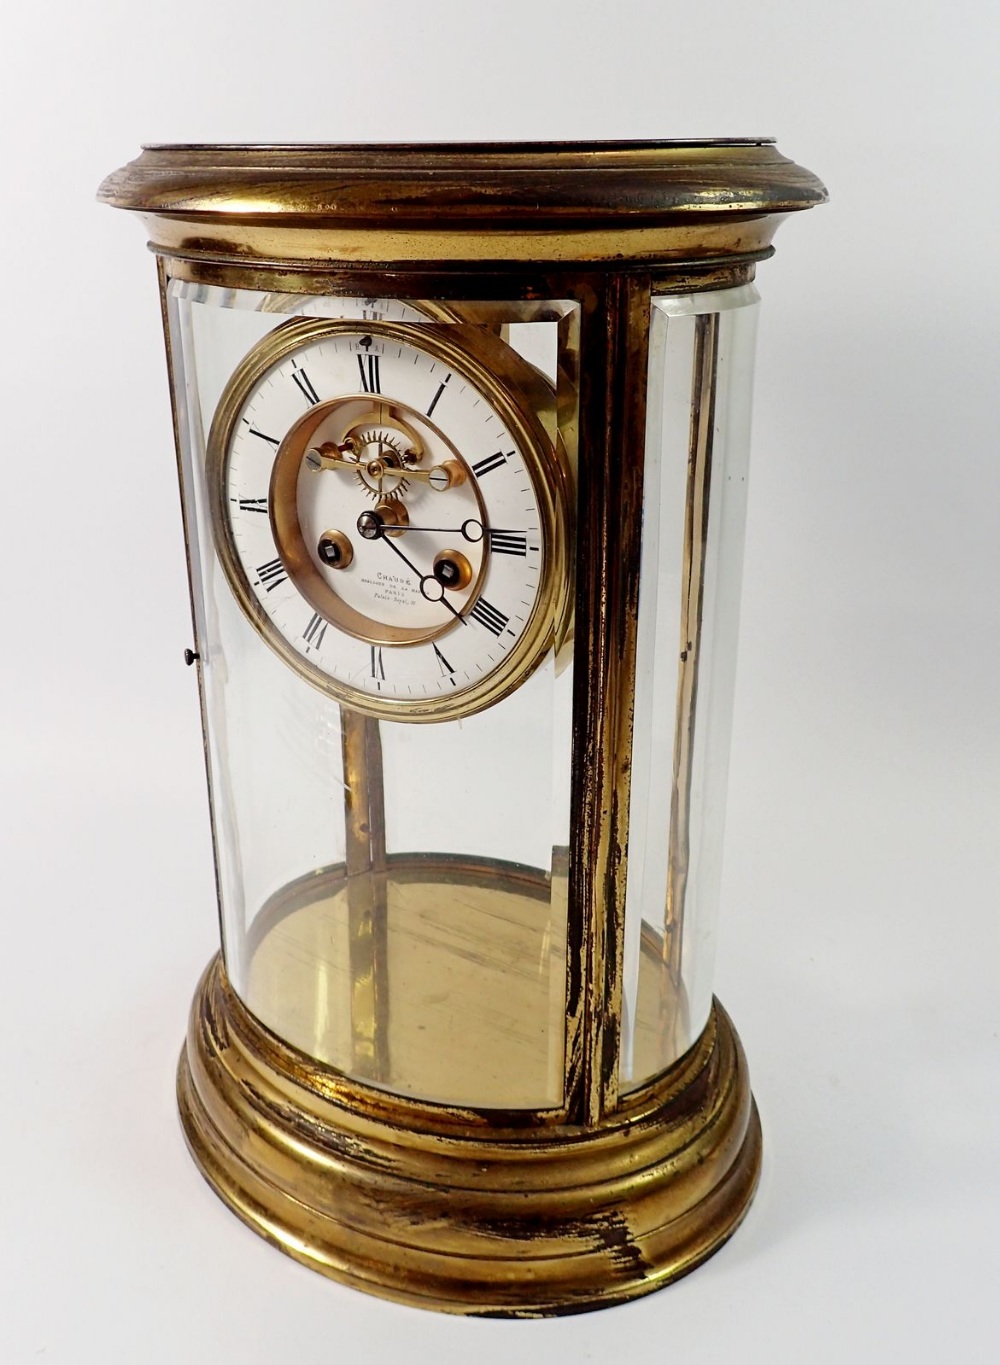 A fine 19th century French oval four glass mantel clock with mercury compensated pendulum by Chaude, - Image 5 of 5